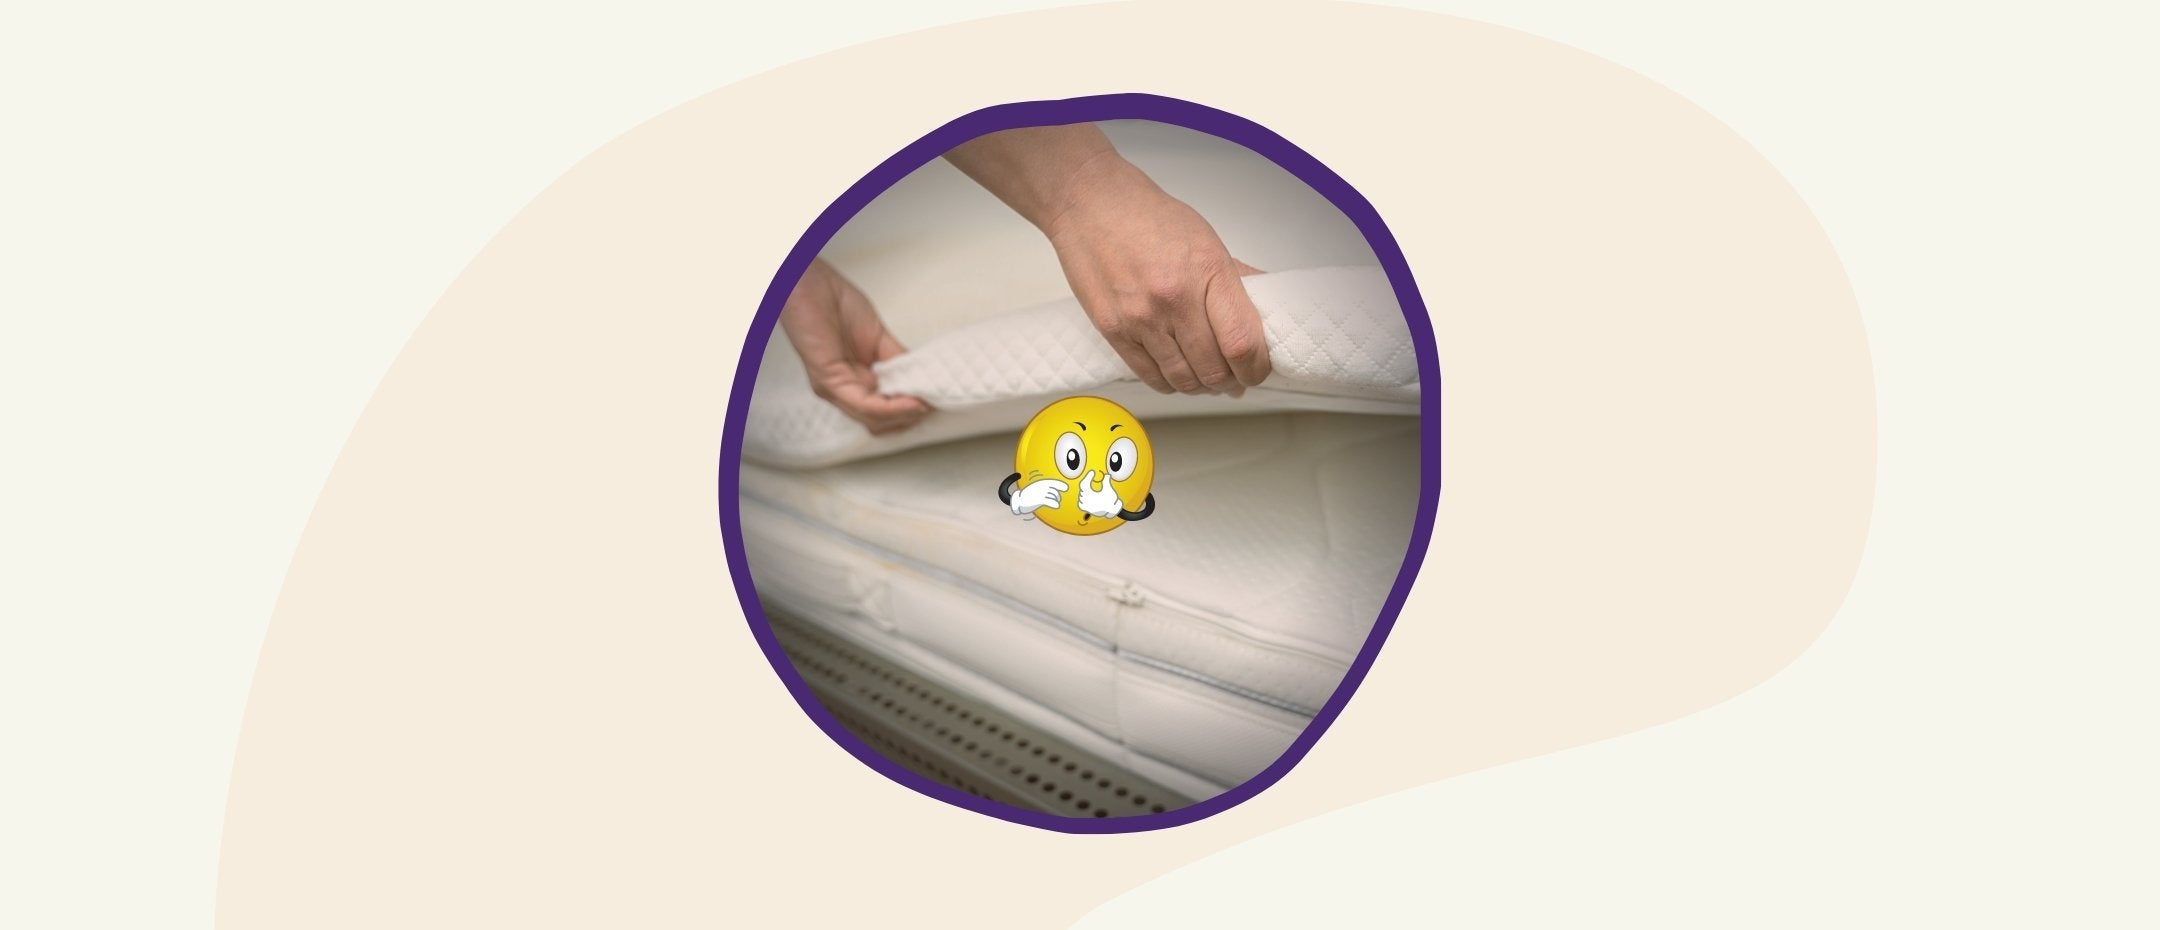 Mr. Emoji hates the smell of that mattress topper